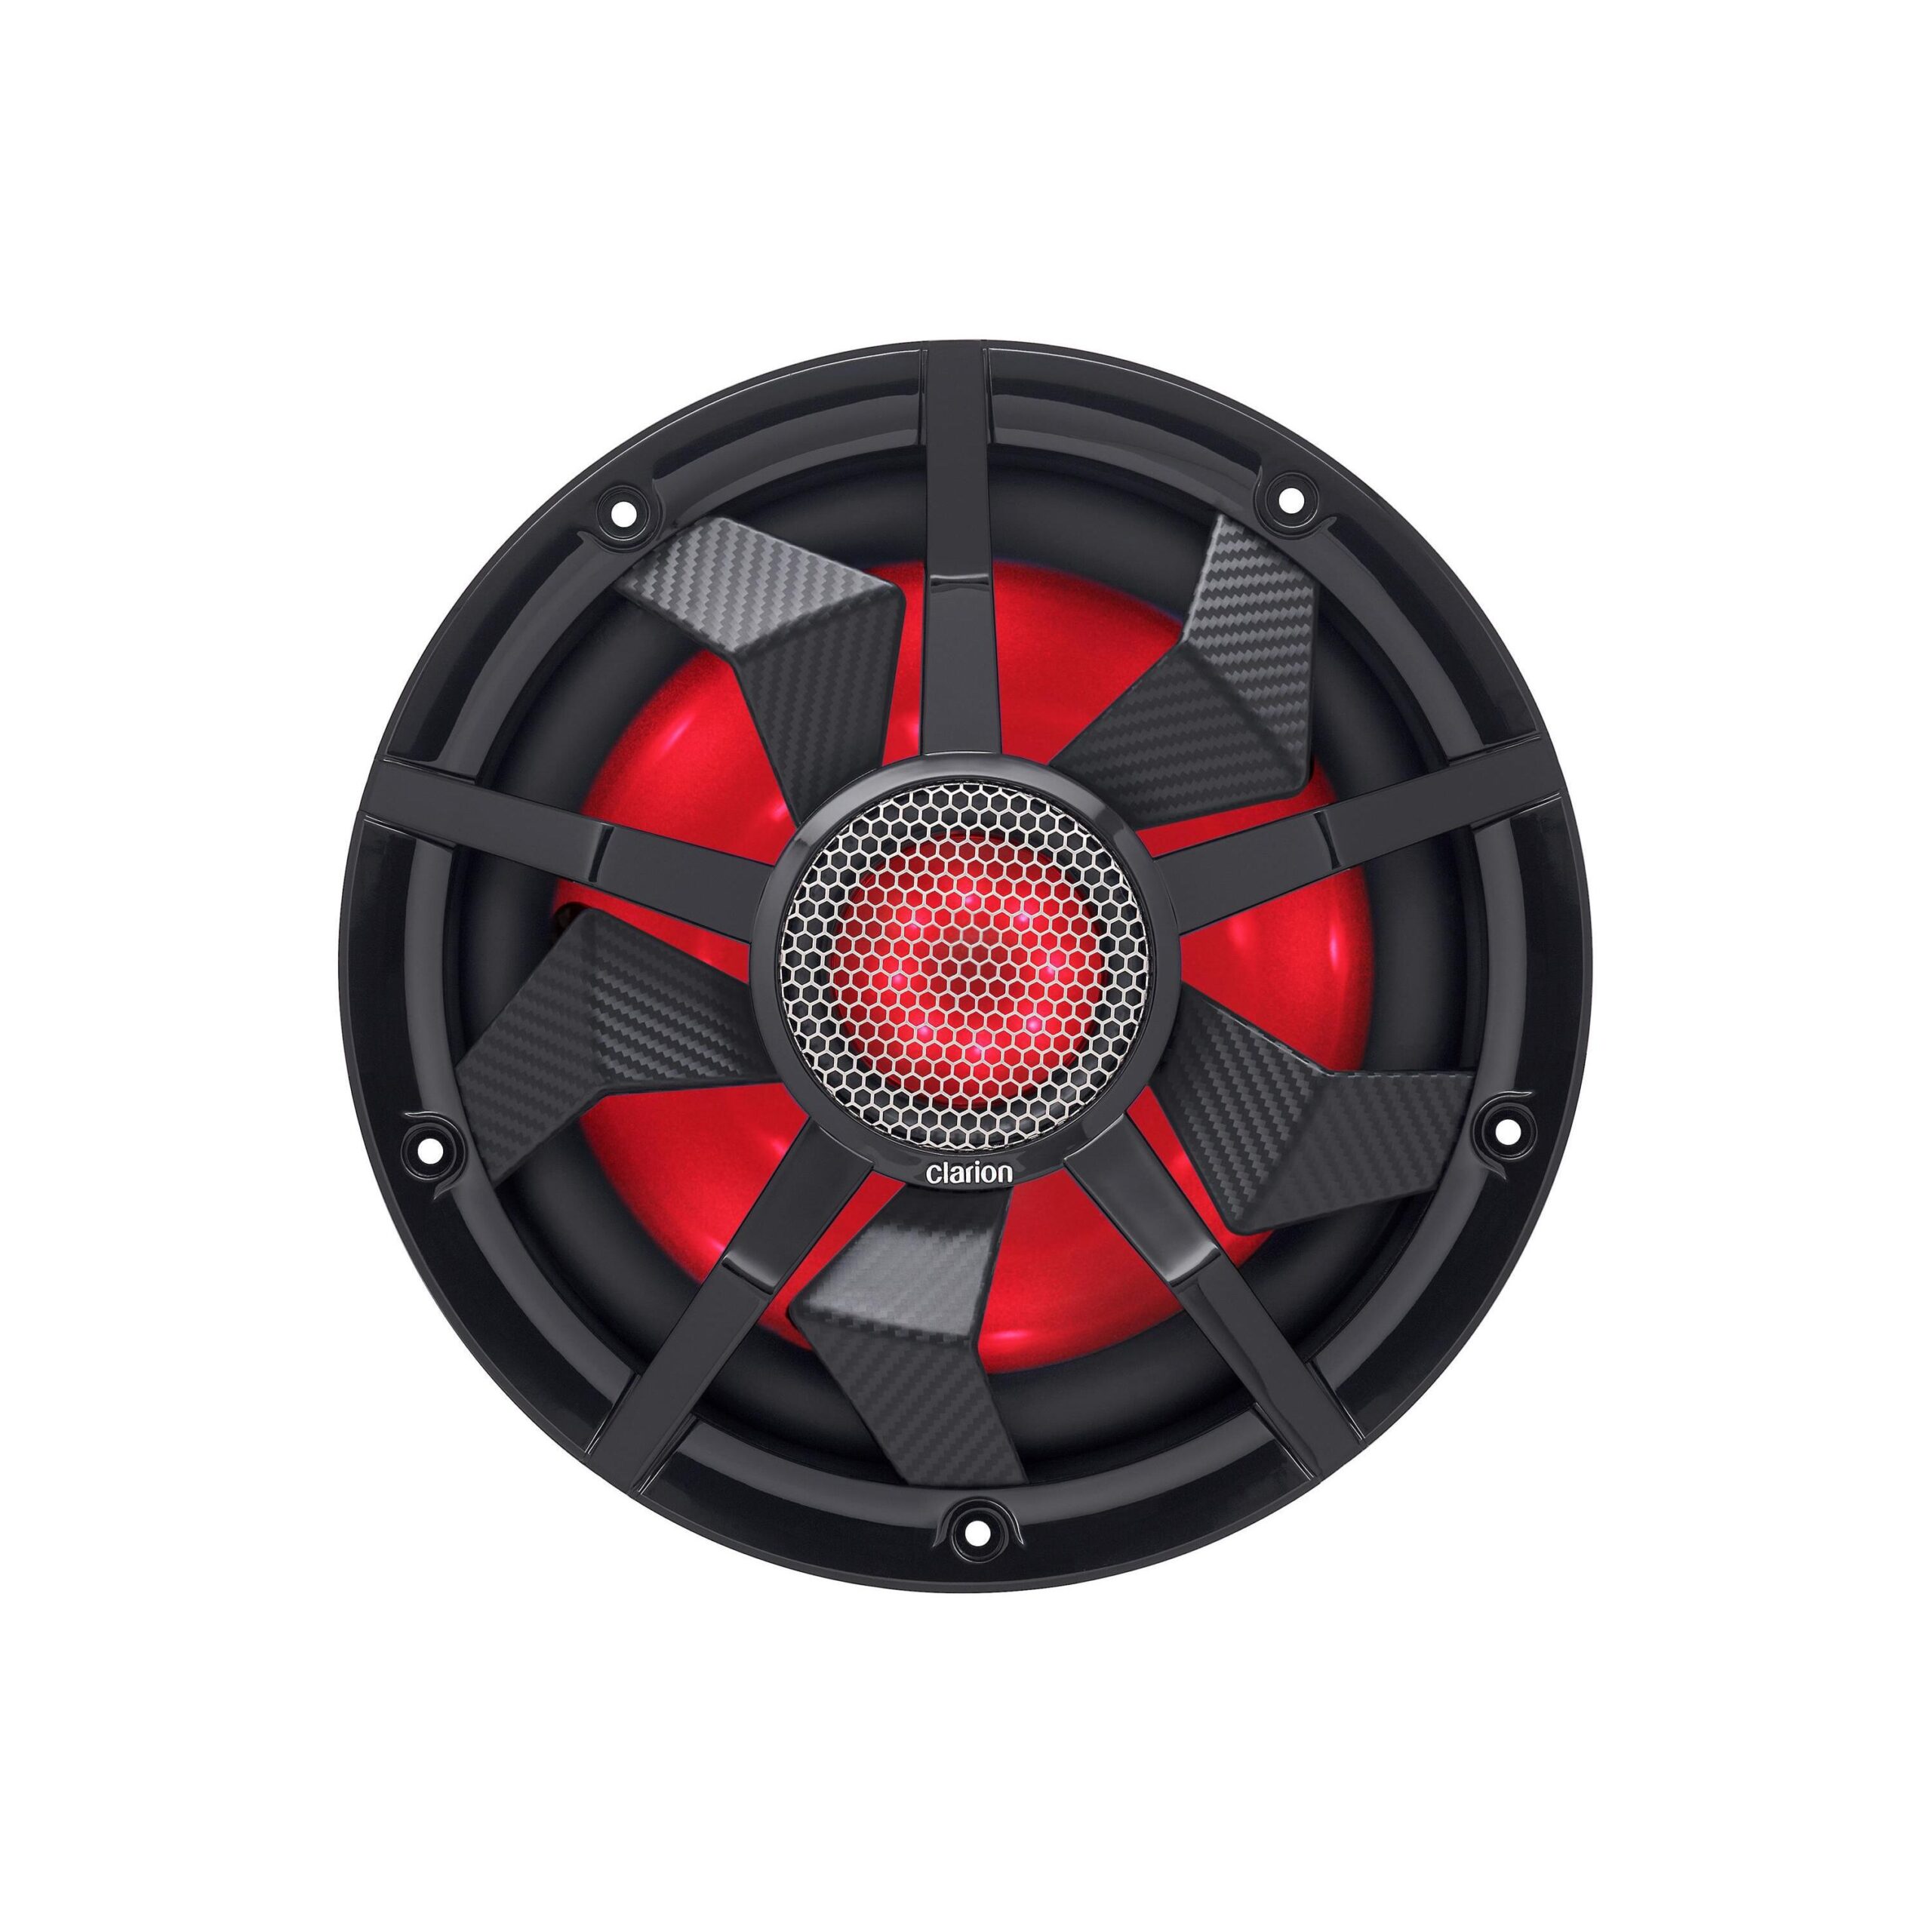 Clarion CM2513WL Black/Silver 10" Dual Voice Coil 800 Watt Waterproof Marine Subwoofer With RGB LED Accent Lighting